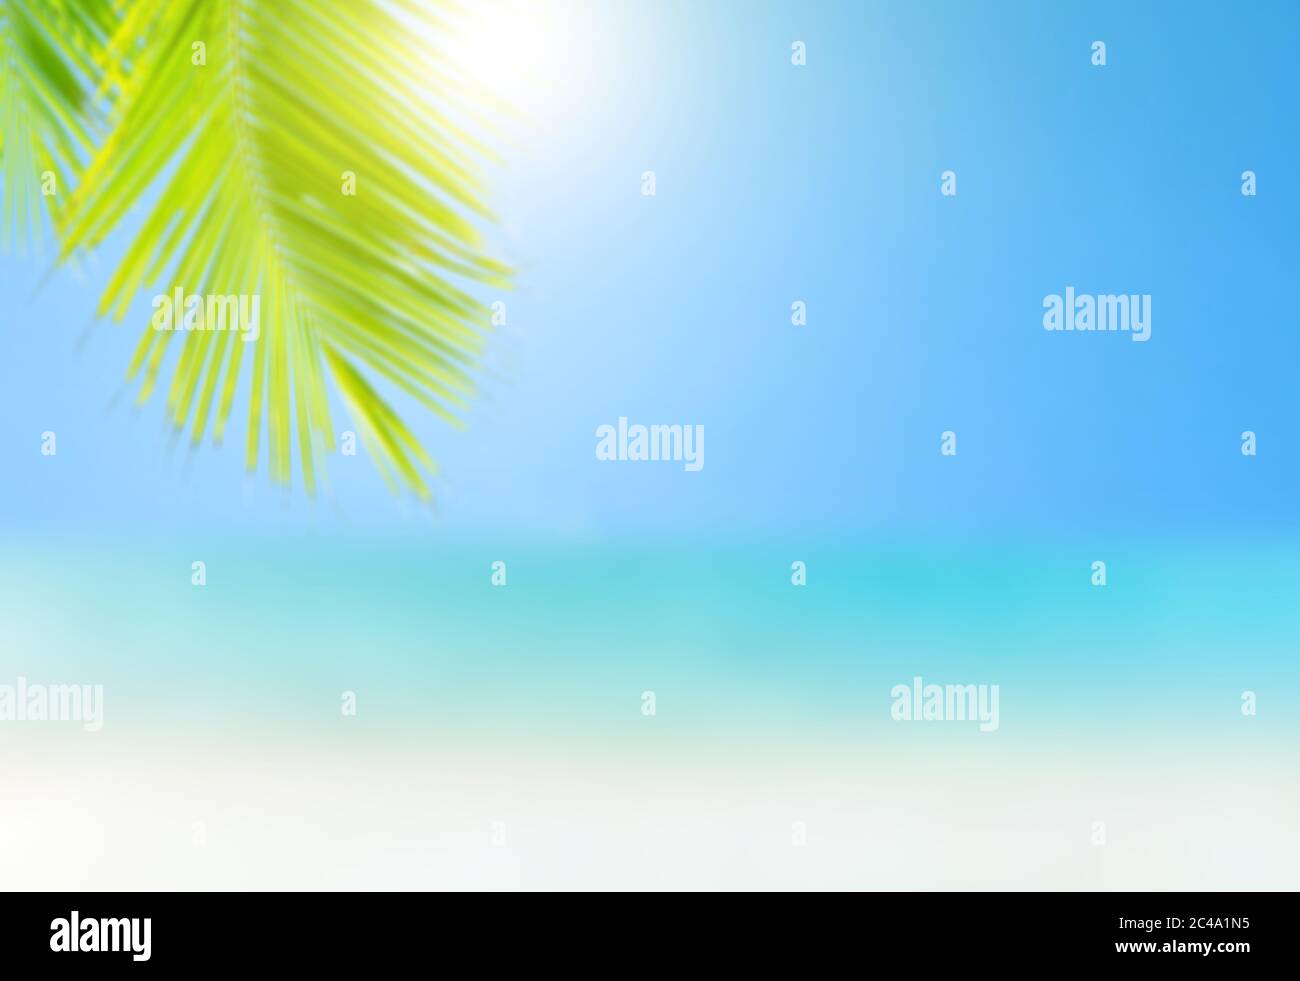 Blurred of palm trees or coconut trees leaf against the blue sky and sunshine light in summer time. Summer background. Stock Photo